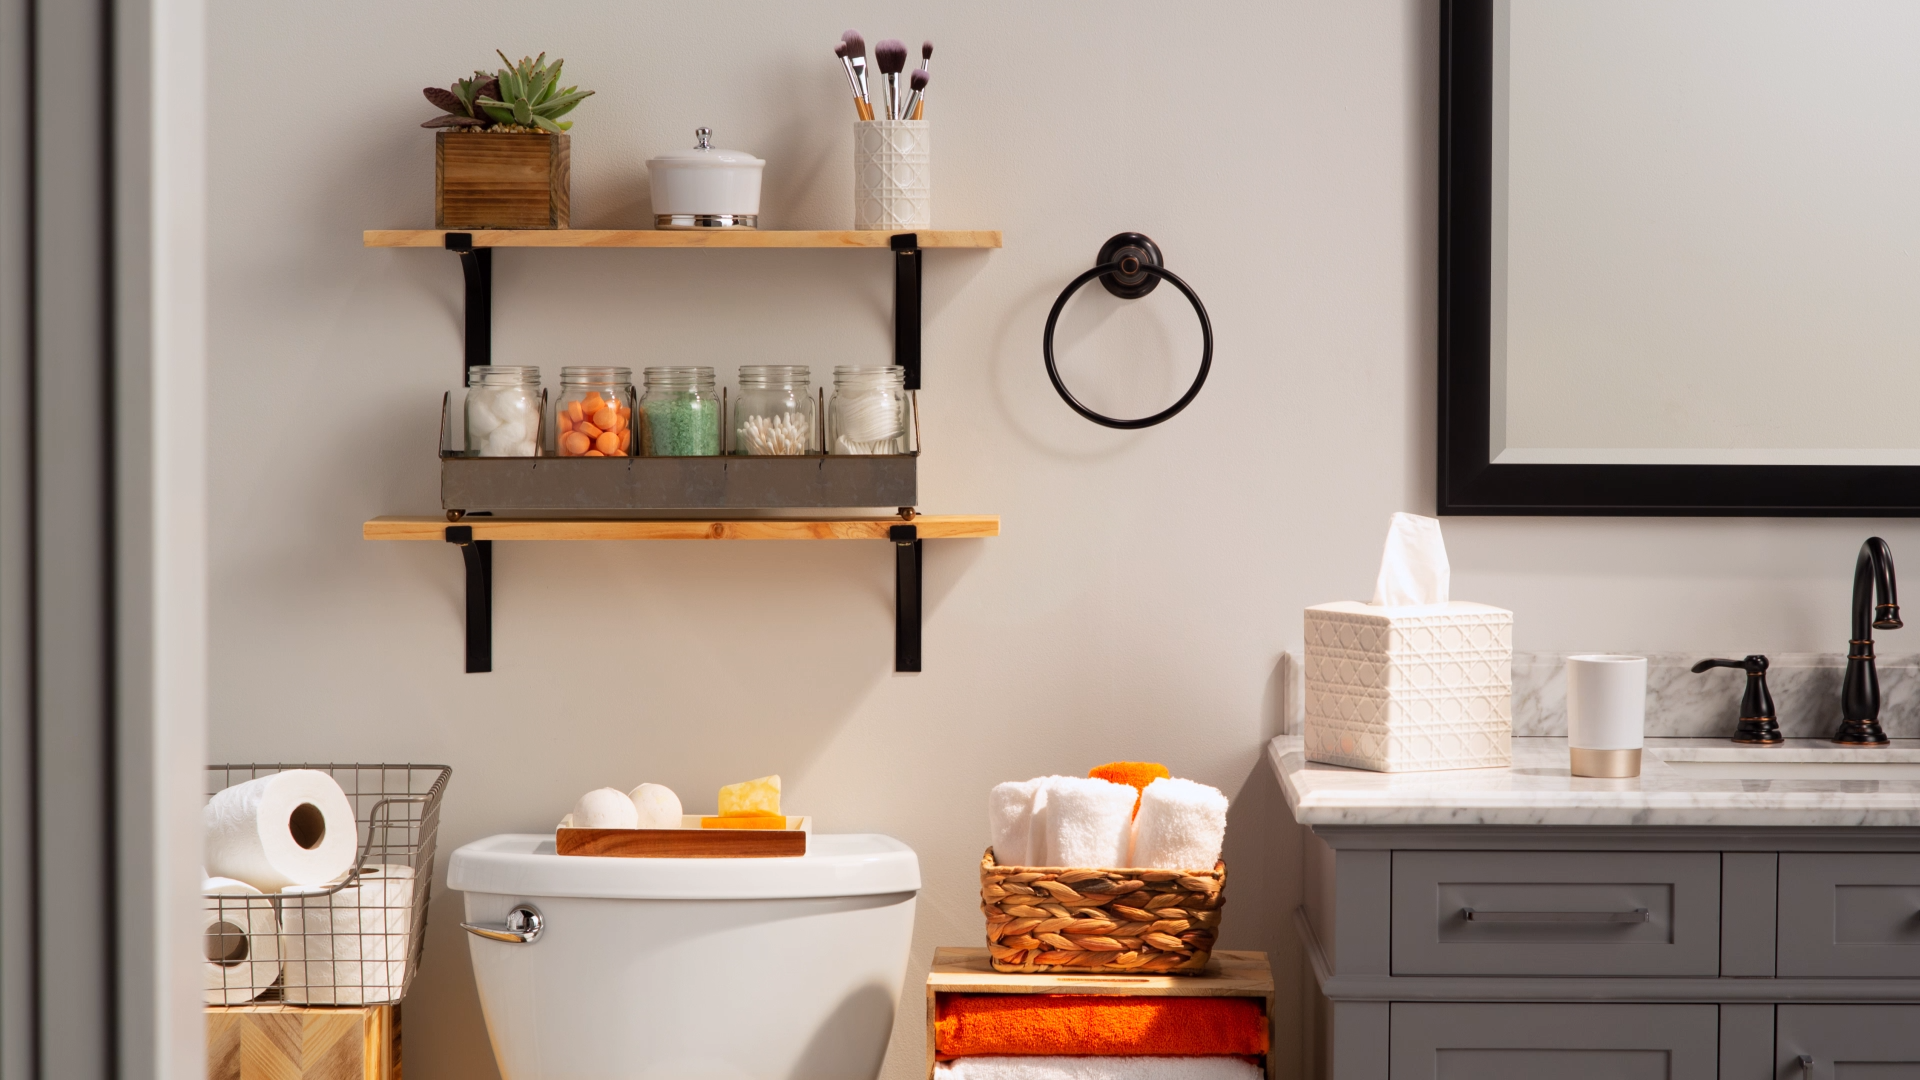 Bathroom Storage - Home Accents - The Home Depot - Bathroom Storage - Home Accents - The Home Depot -   19 diy organization ideas